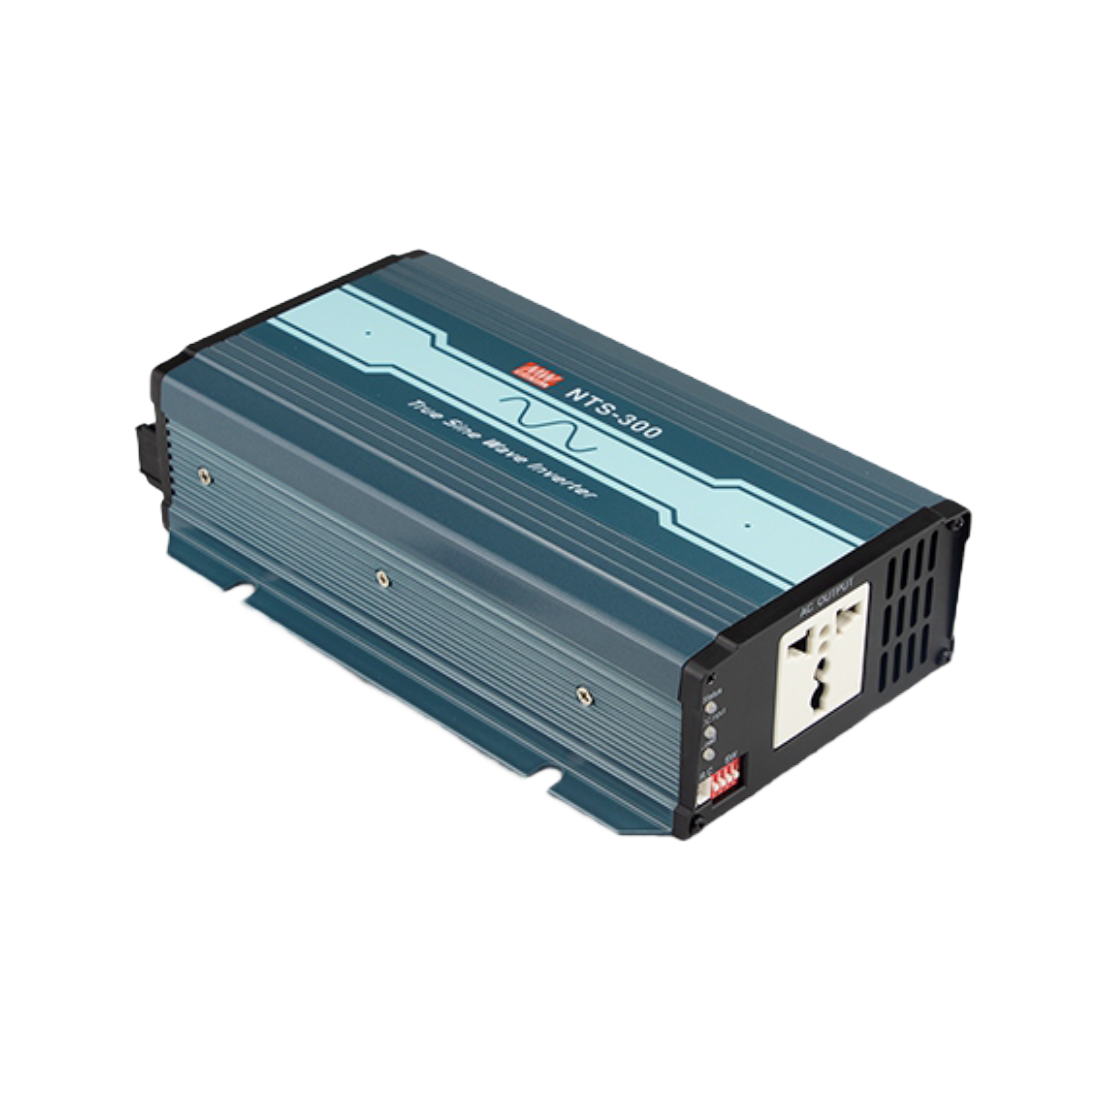 Meanwell NTS-300-224UN 24V Inverter